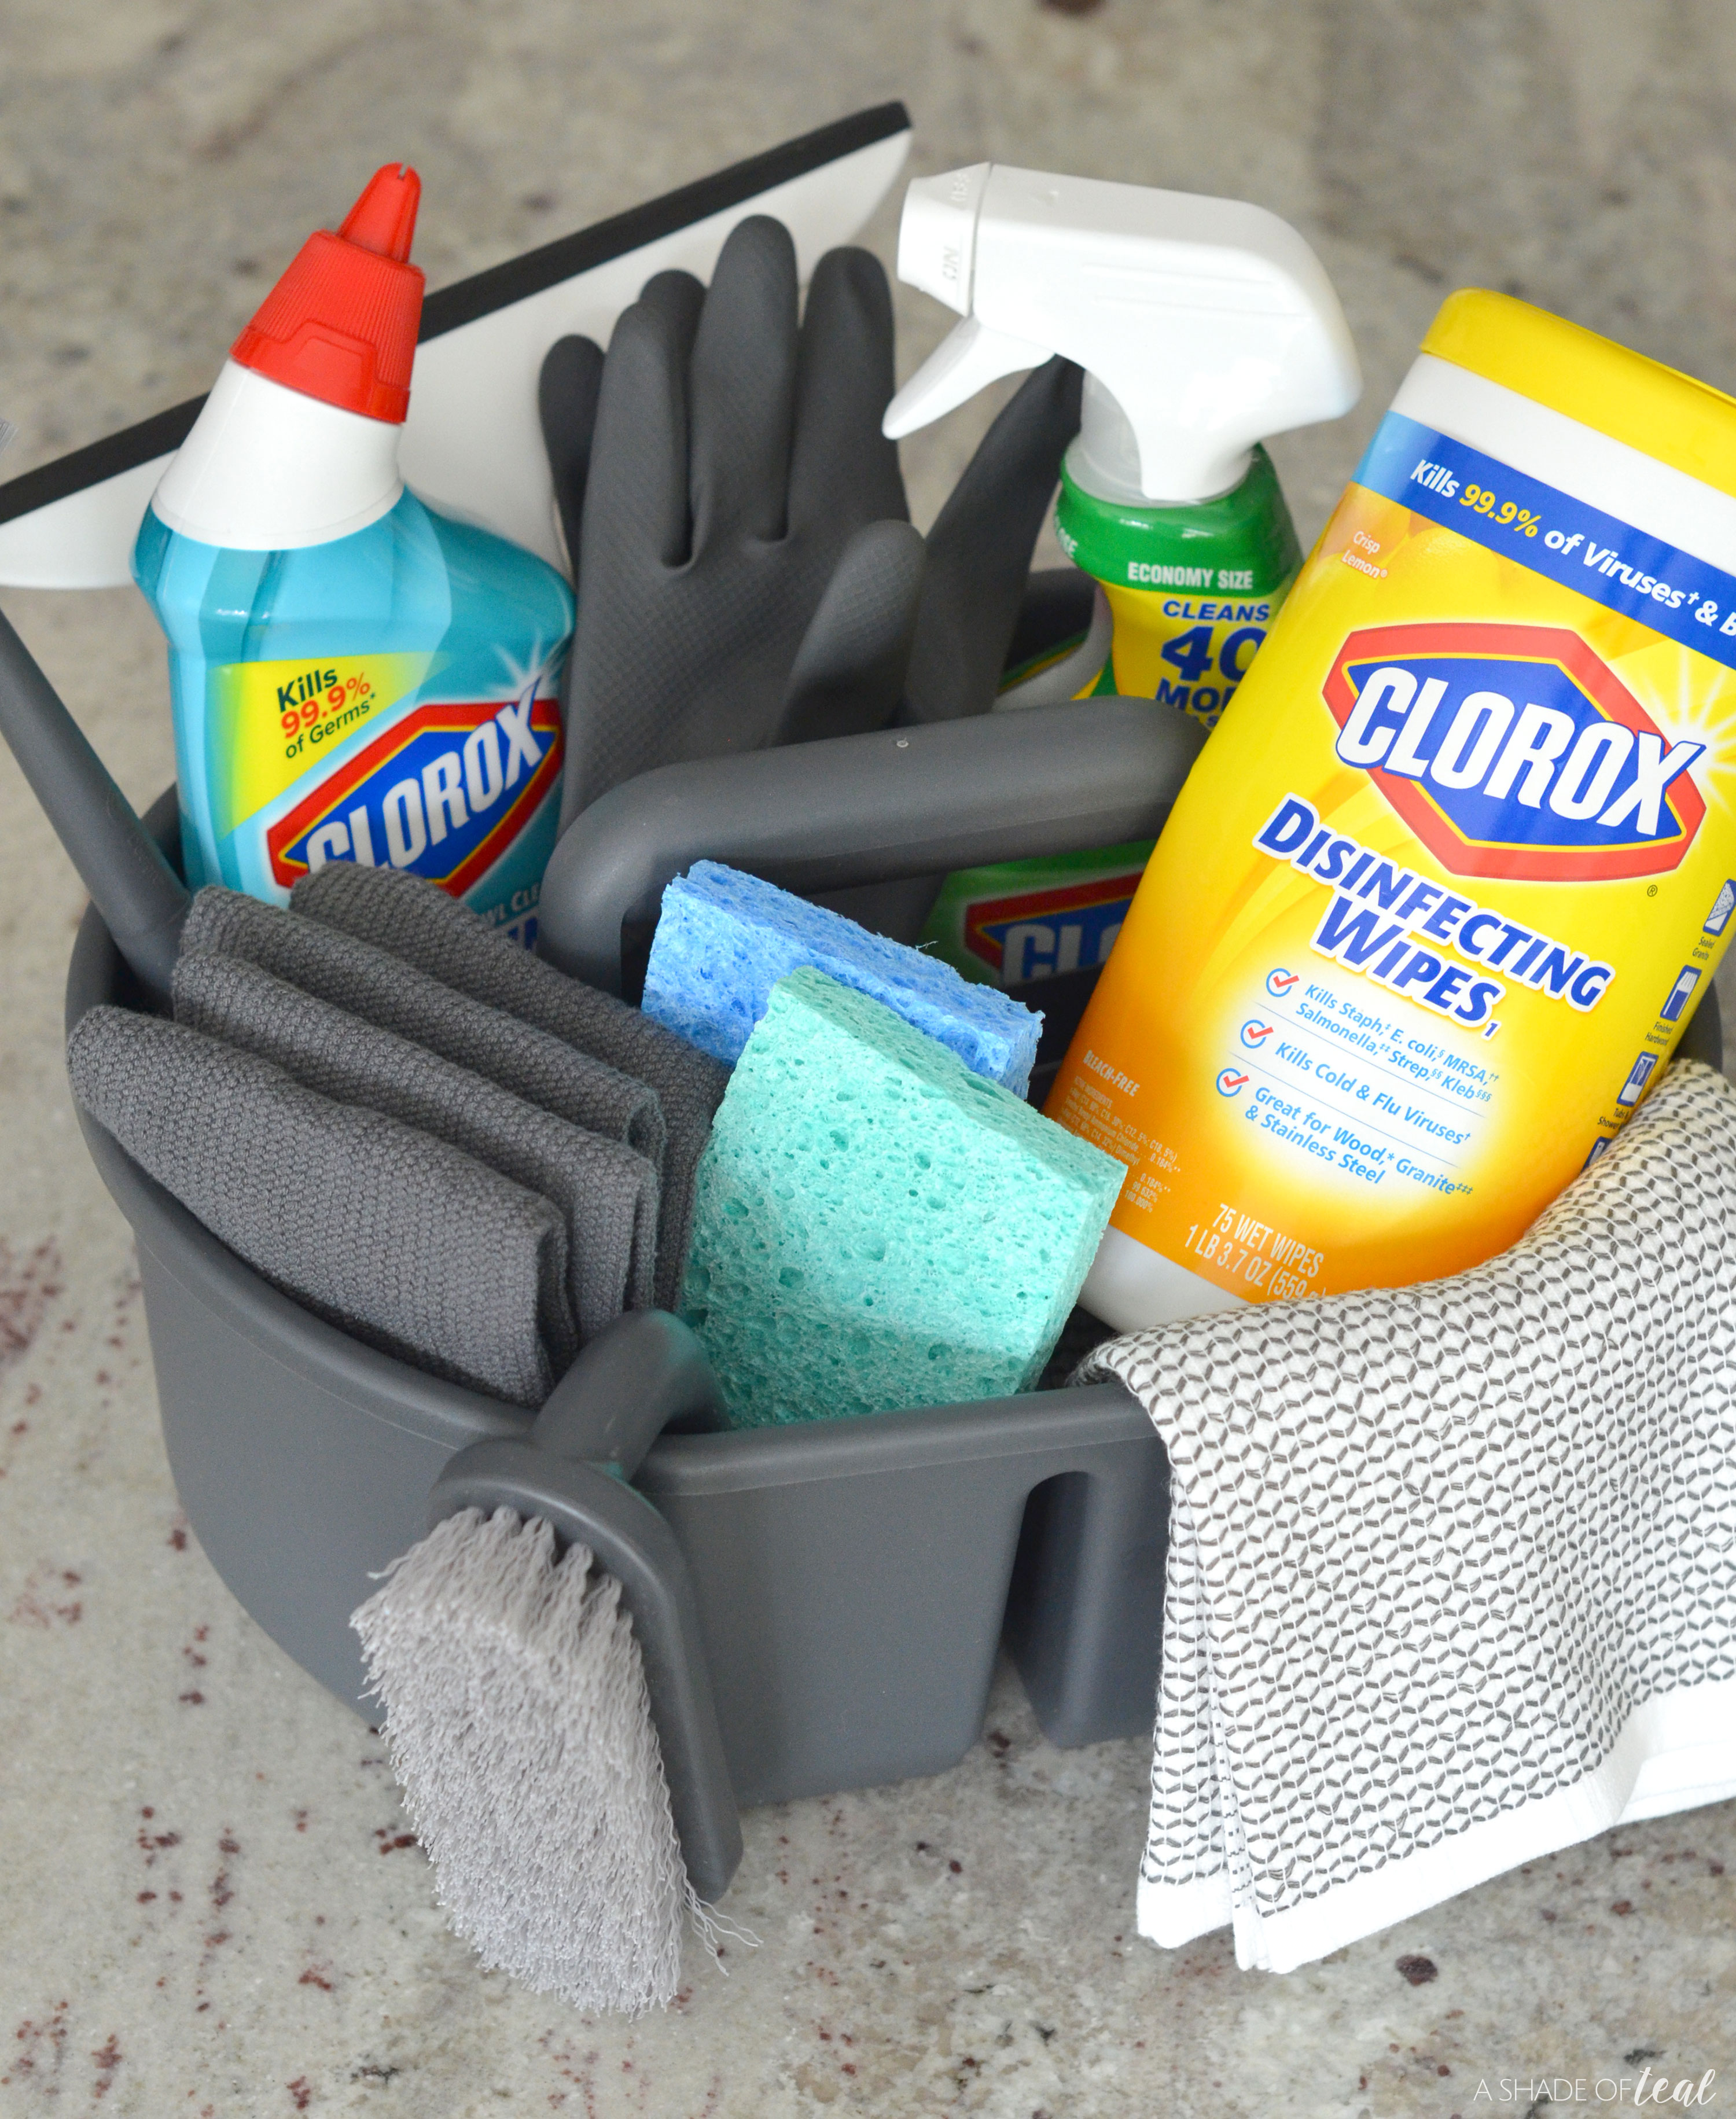 Spring Cleaning Kits: DIY Gifts to Make or Buy